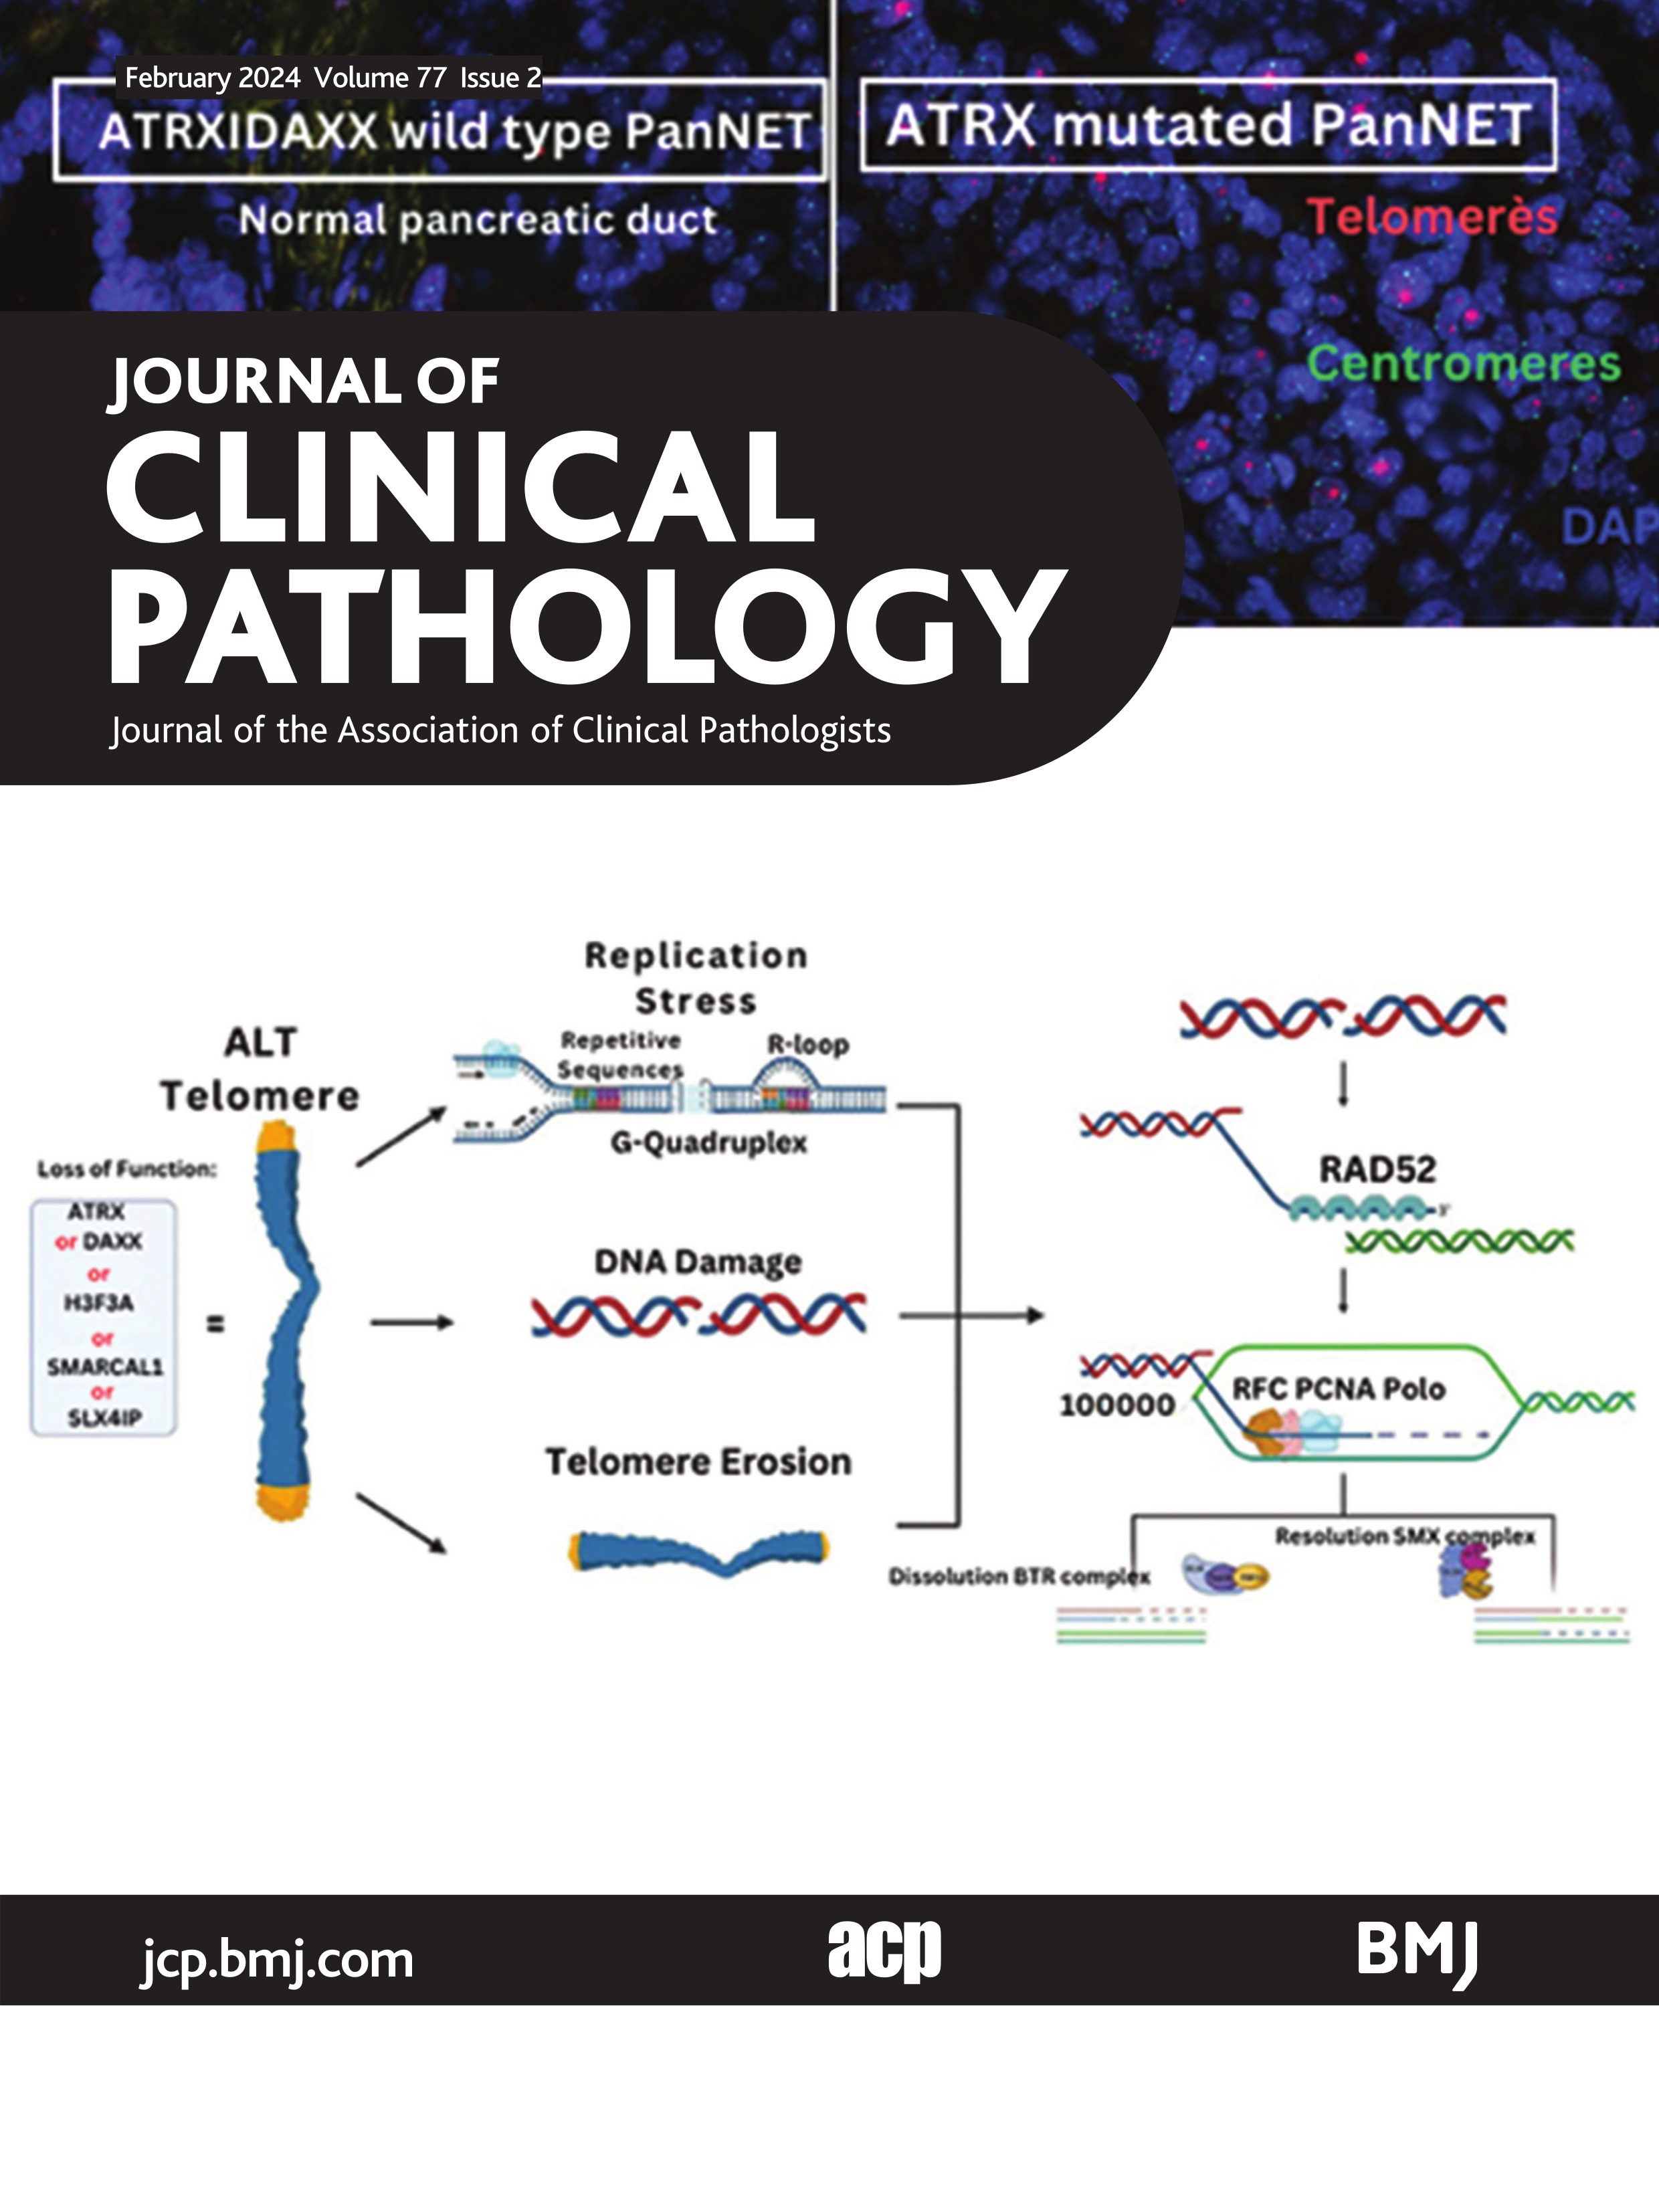 Evolving educational landscape in pathology: a comprehensive bibliometric and visual analysis including digital teaching and learning resources